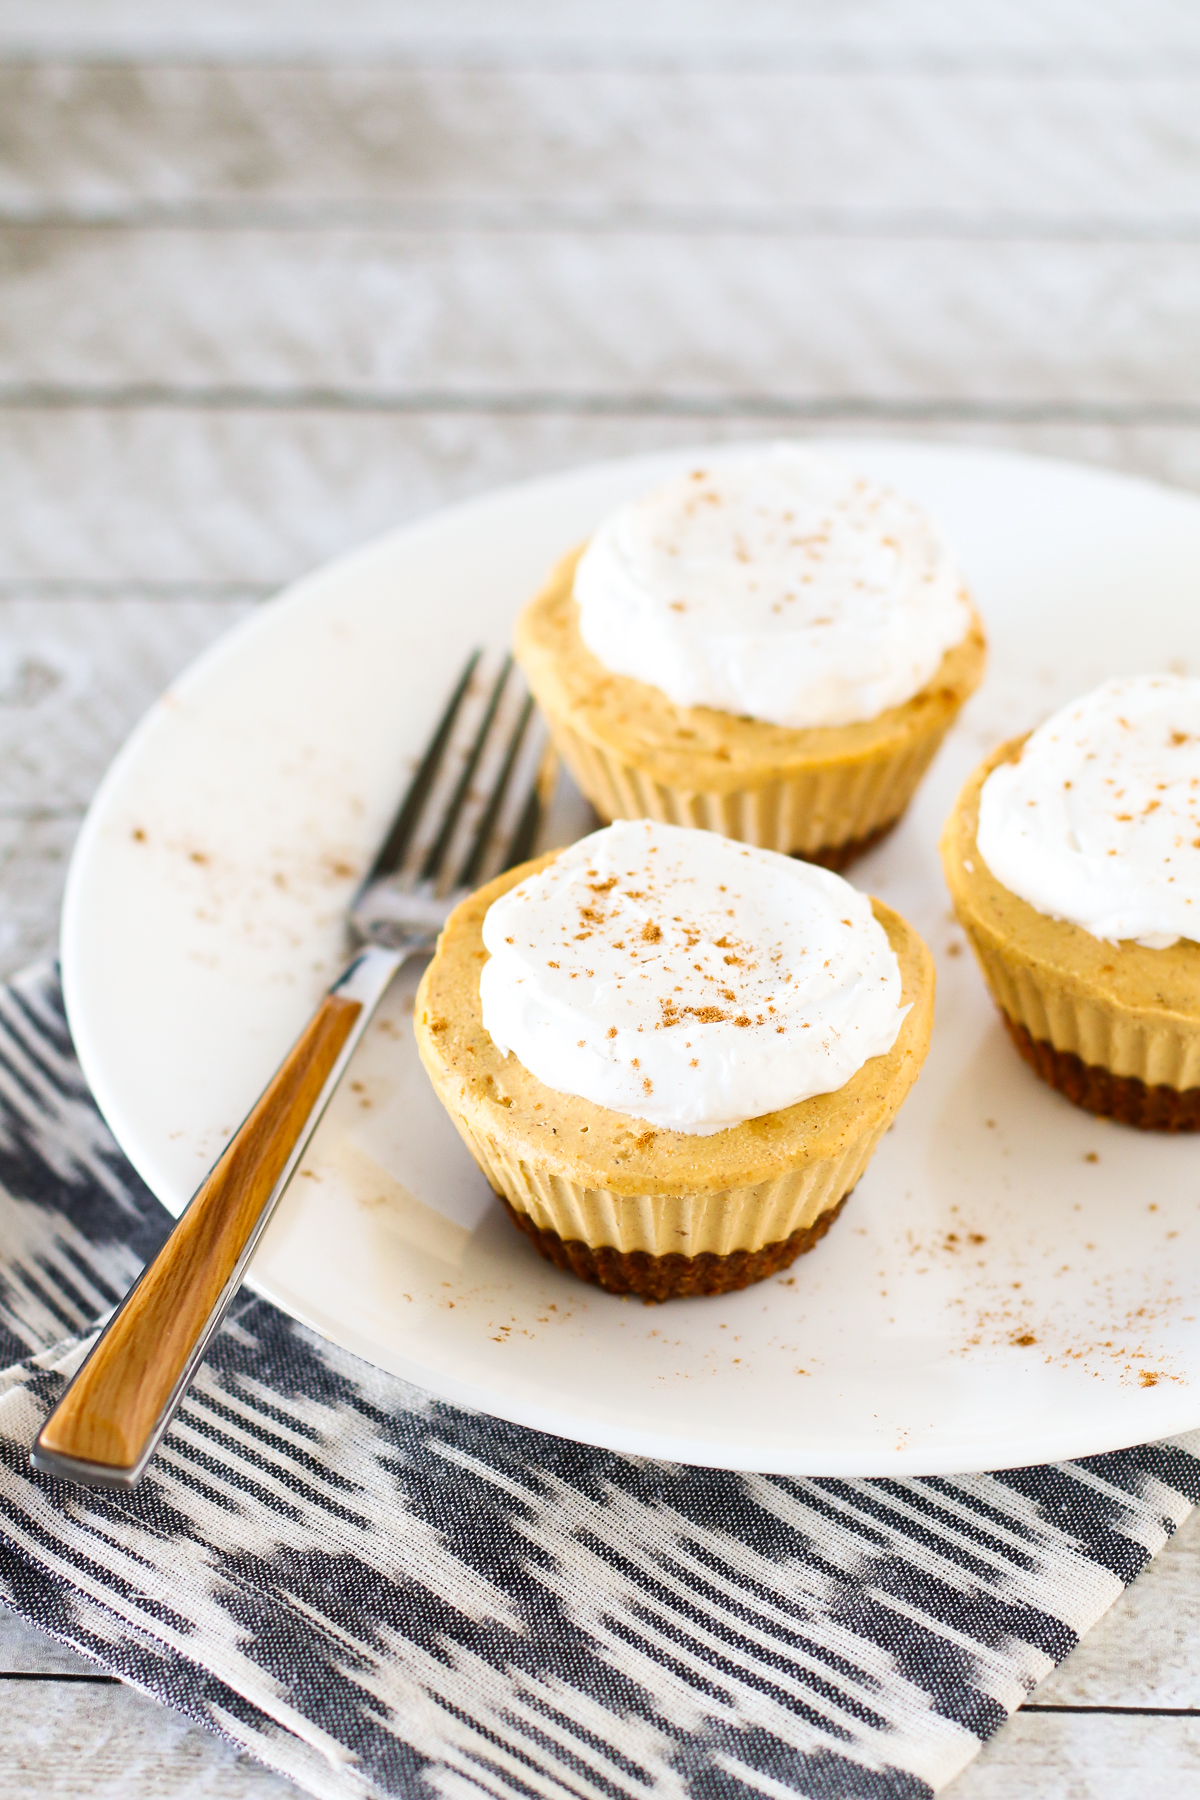 Gluten Free Vegan Mini Pumpkin Cheesecakes. Creamy cashew-based cheesecakes with pumpkin and all the fall spices. 